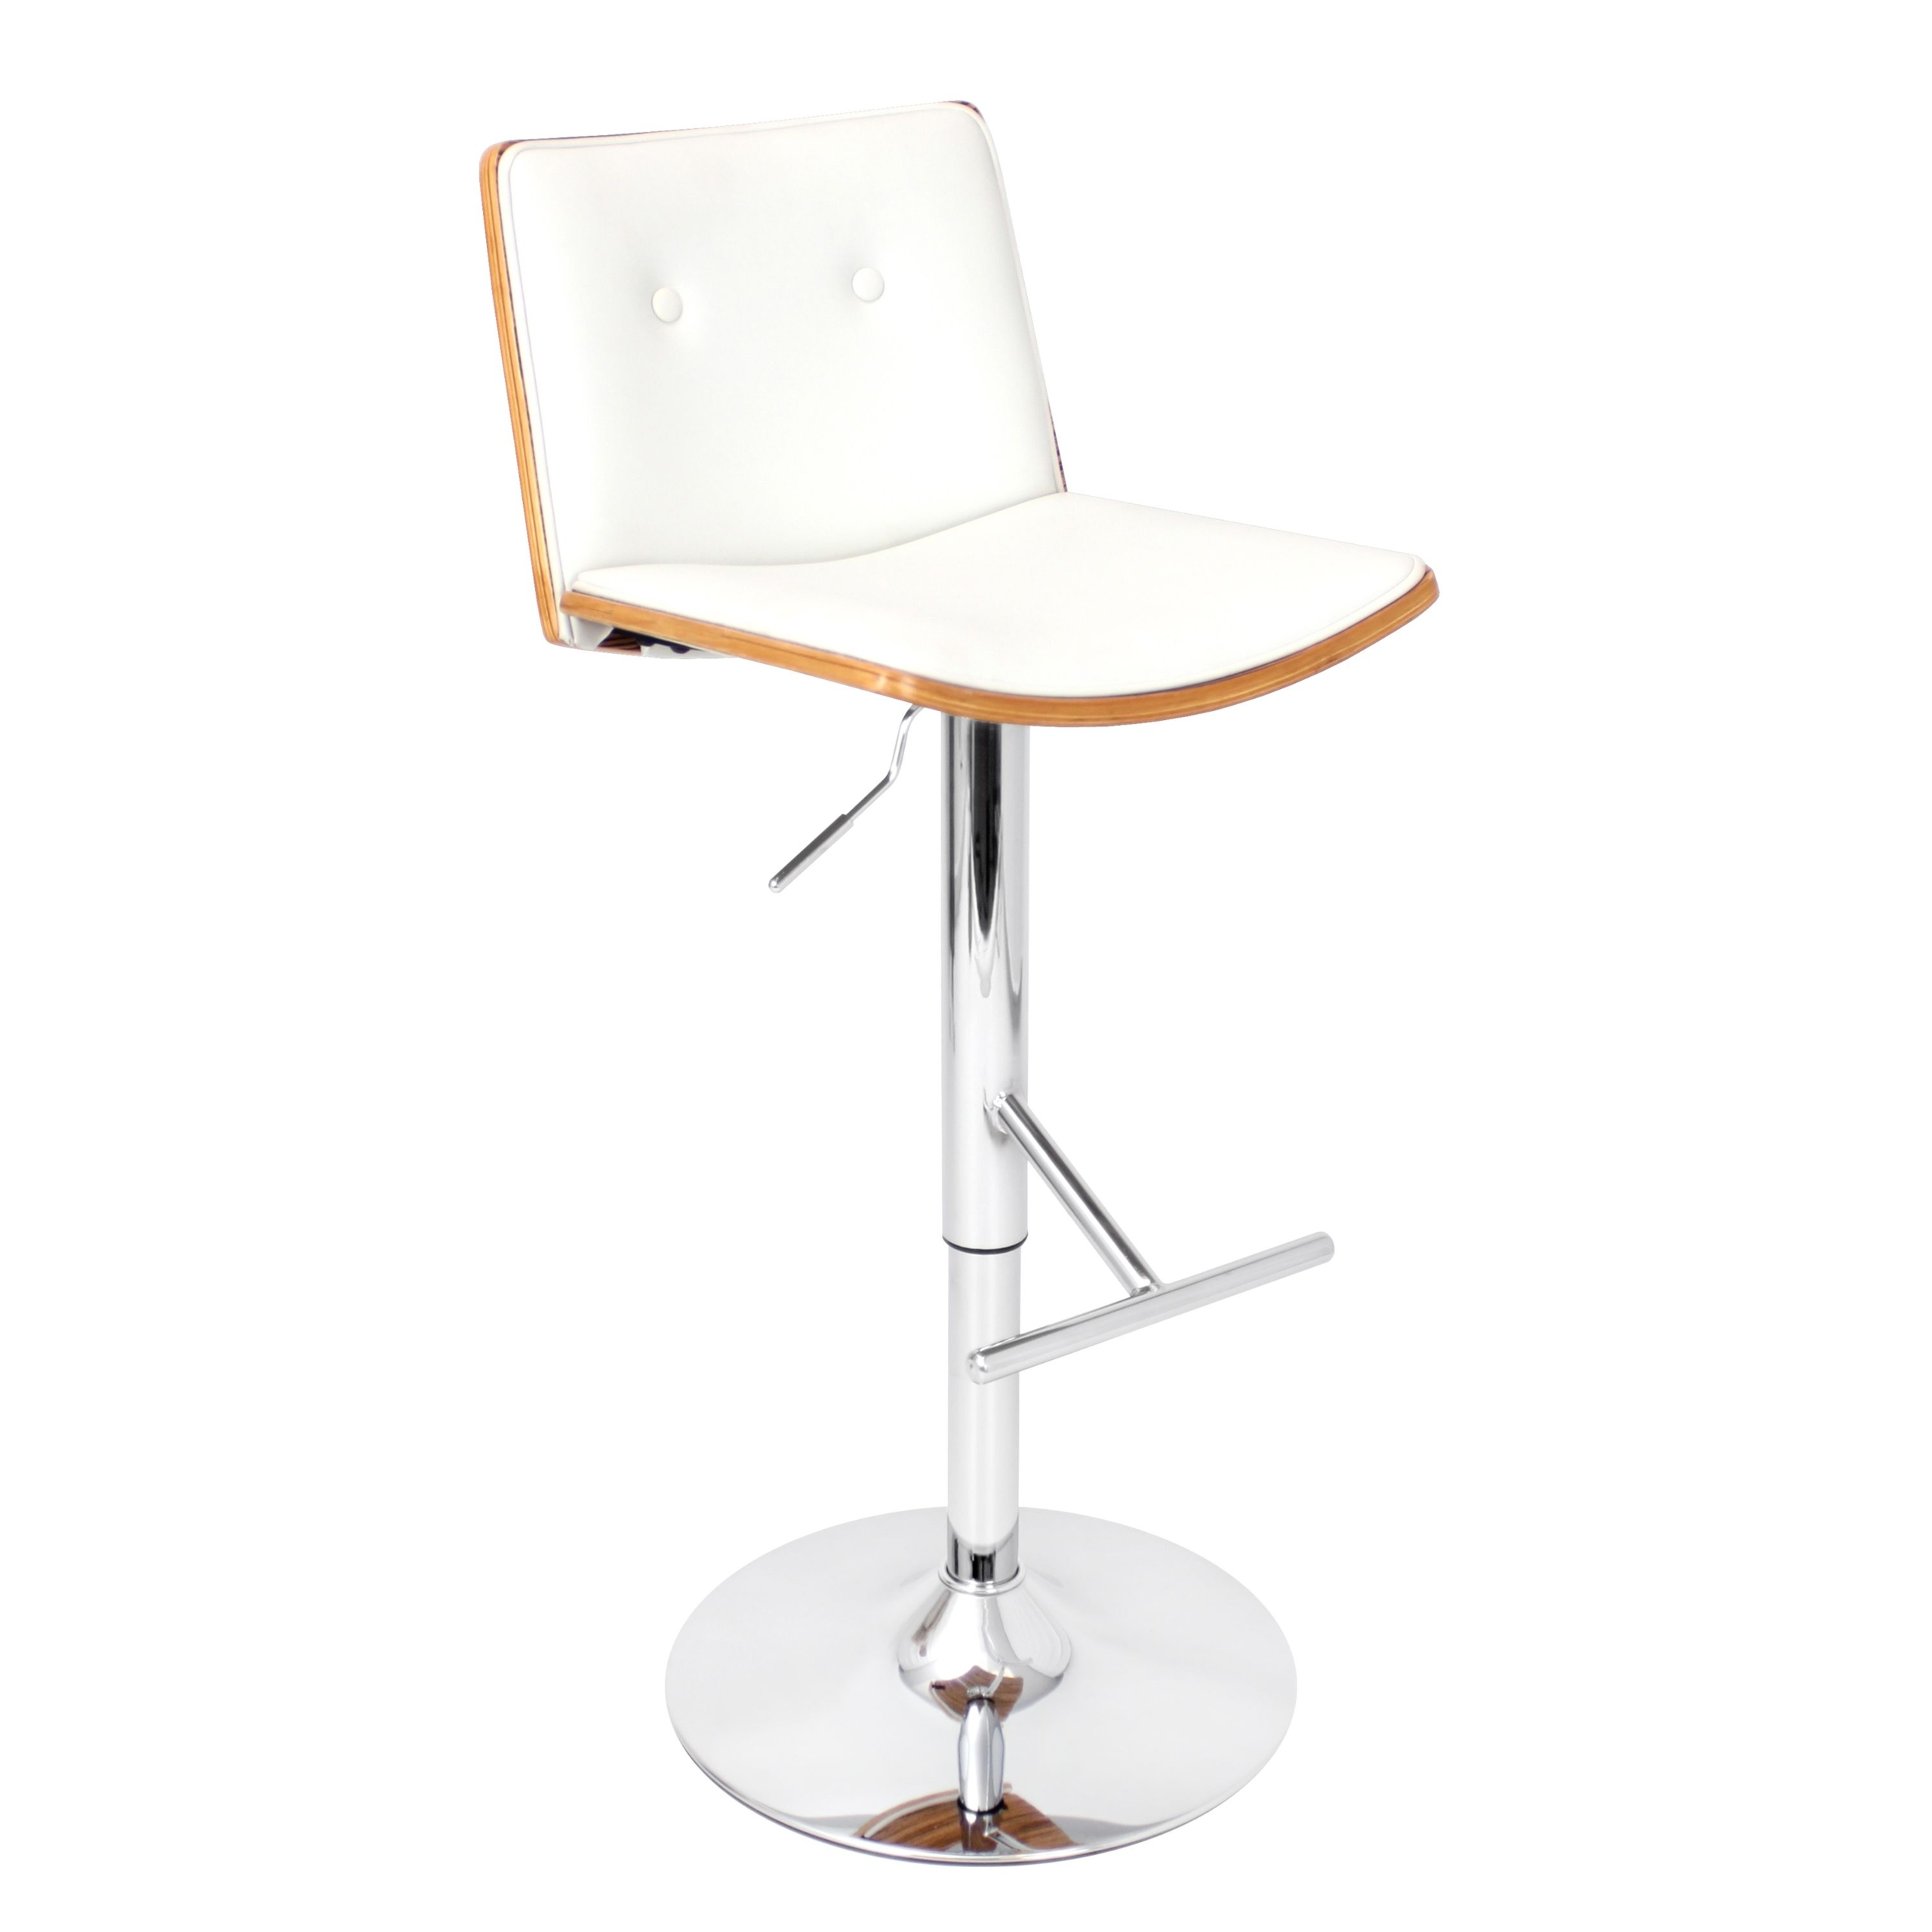 Overstock the elegant design of this lustra barstool will add